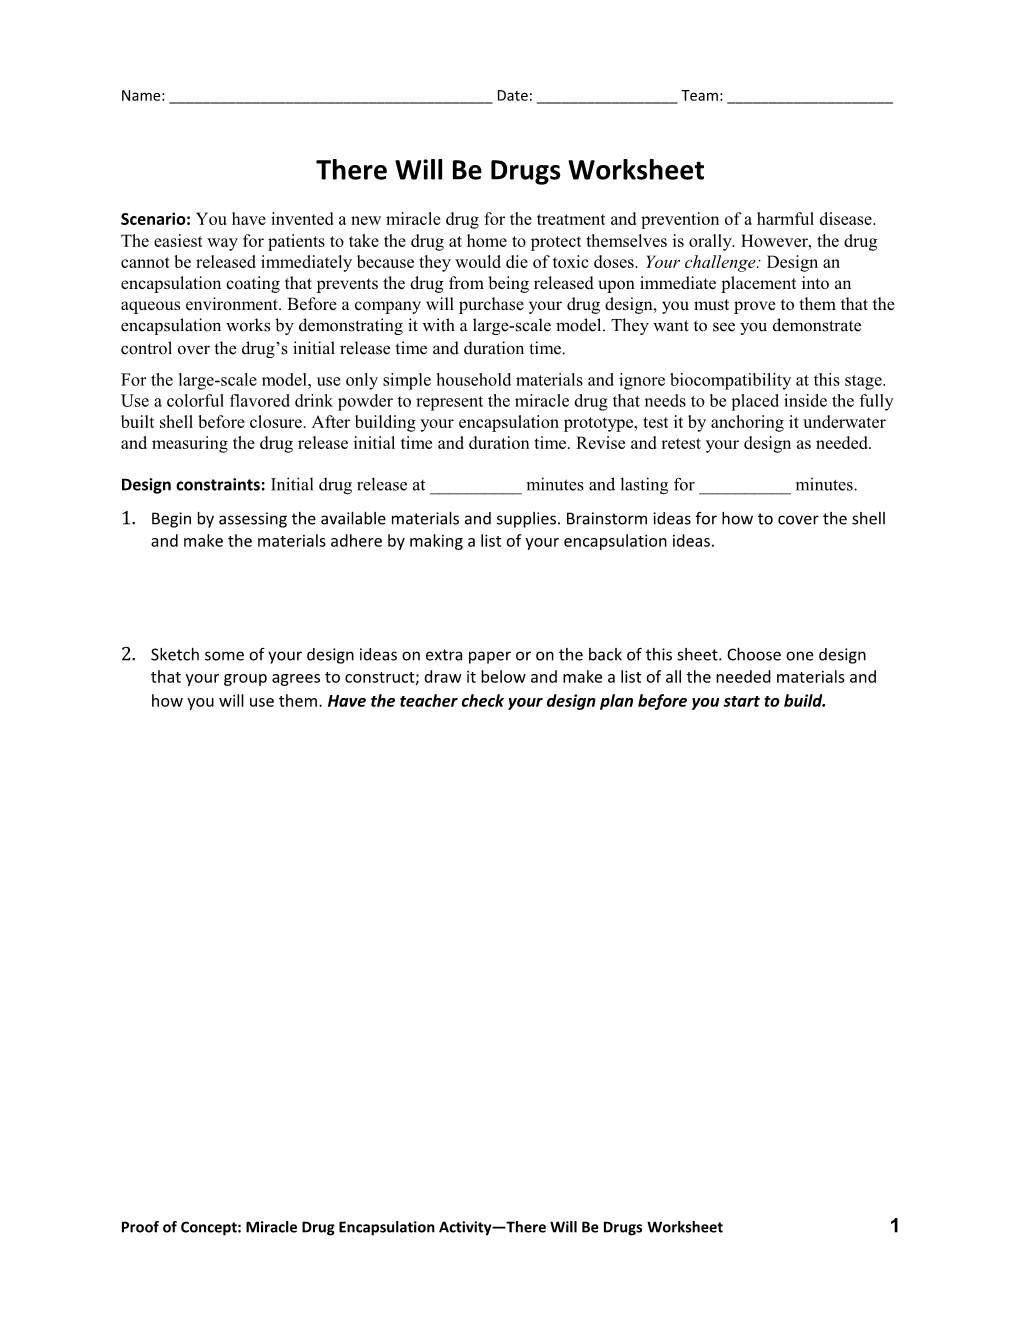 There Will Be Drugs Worksheet